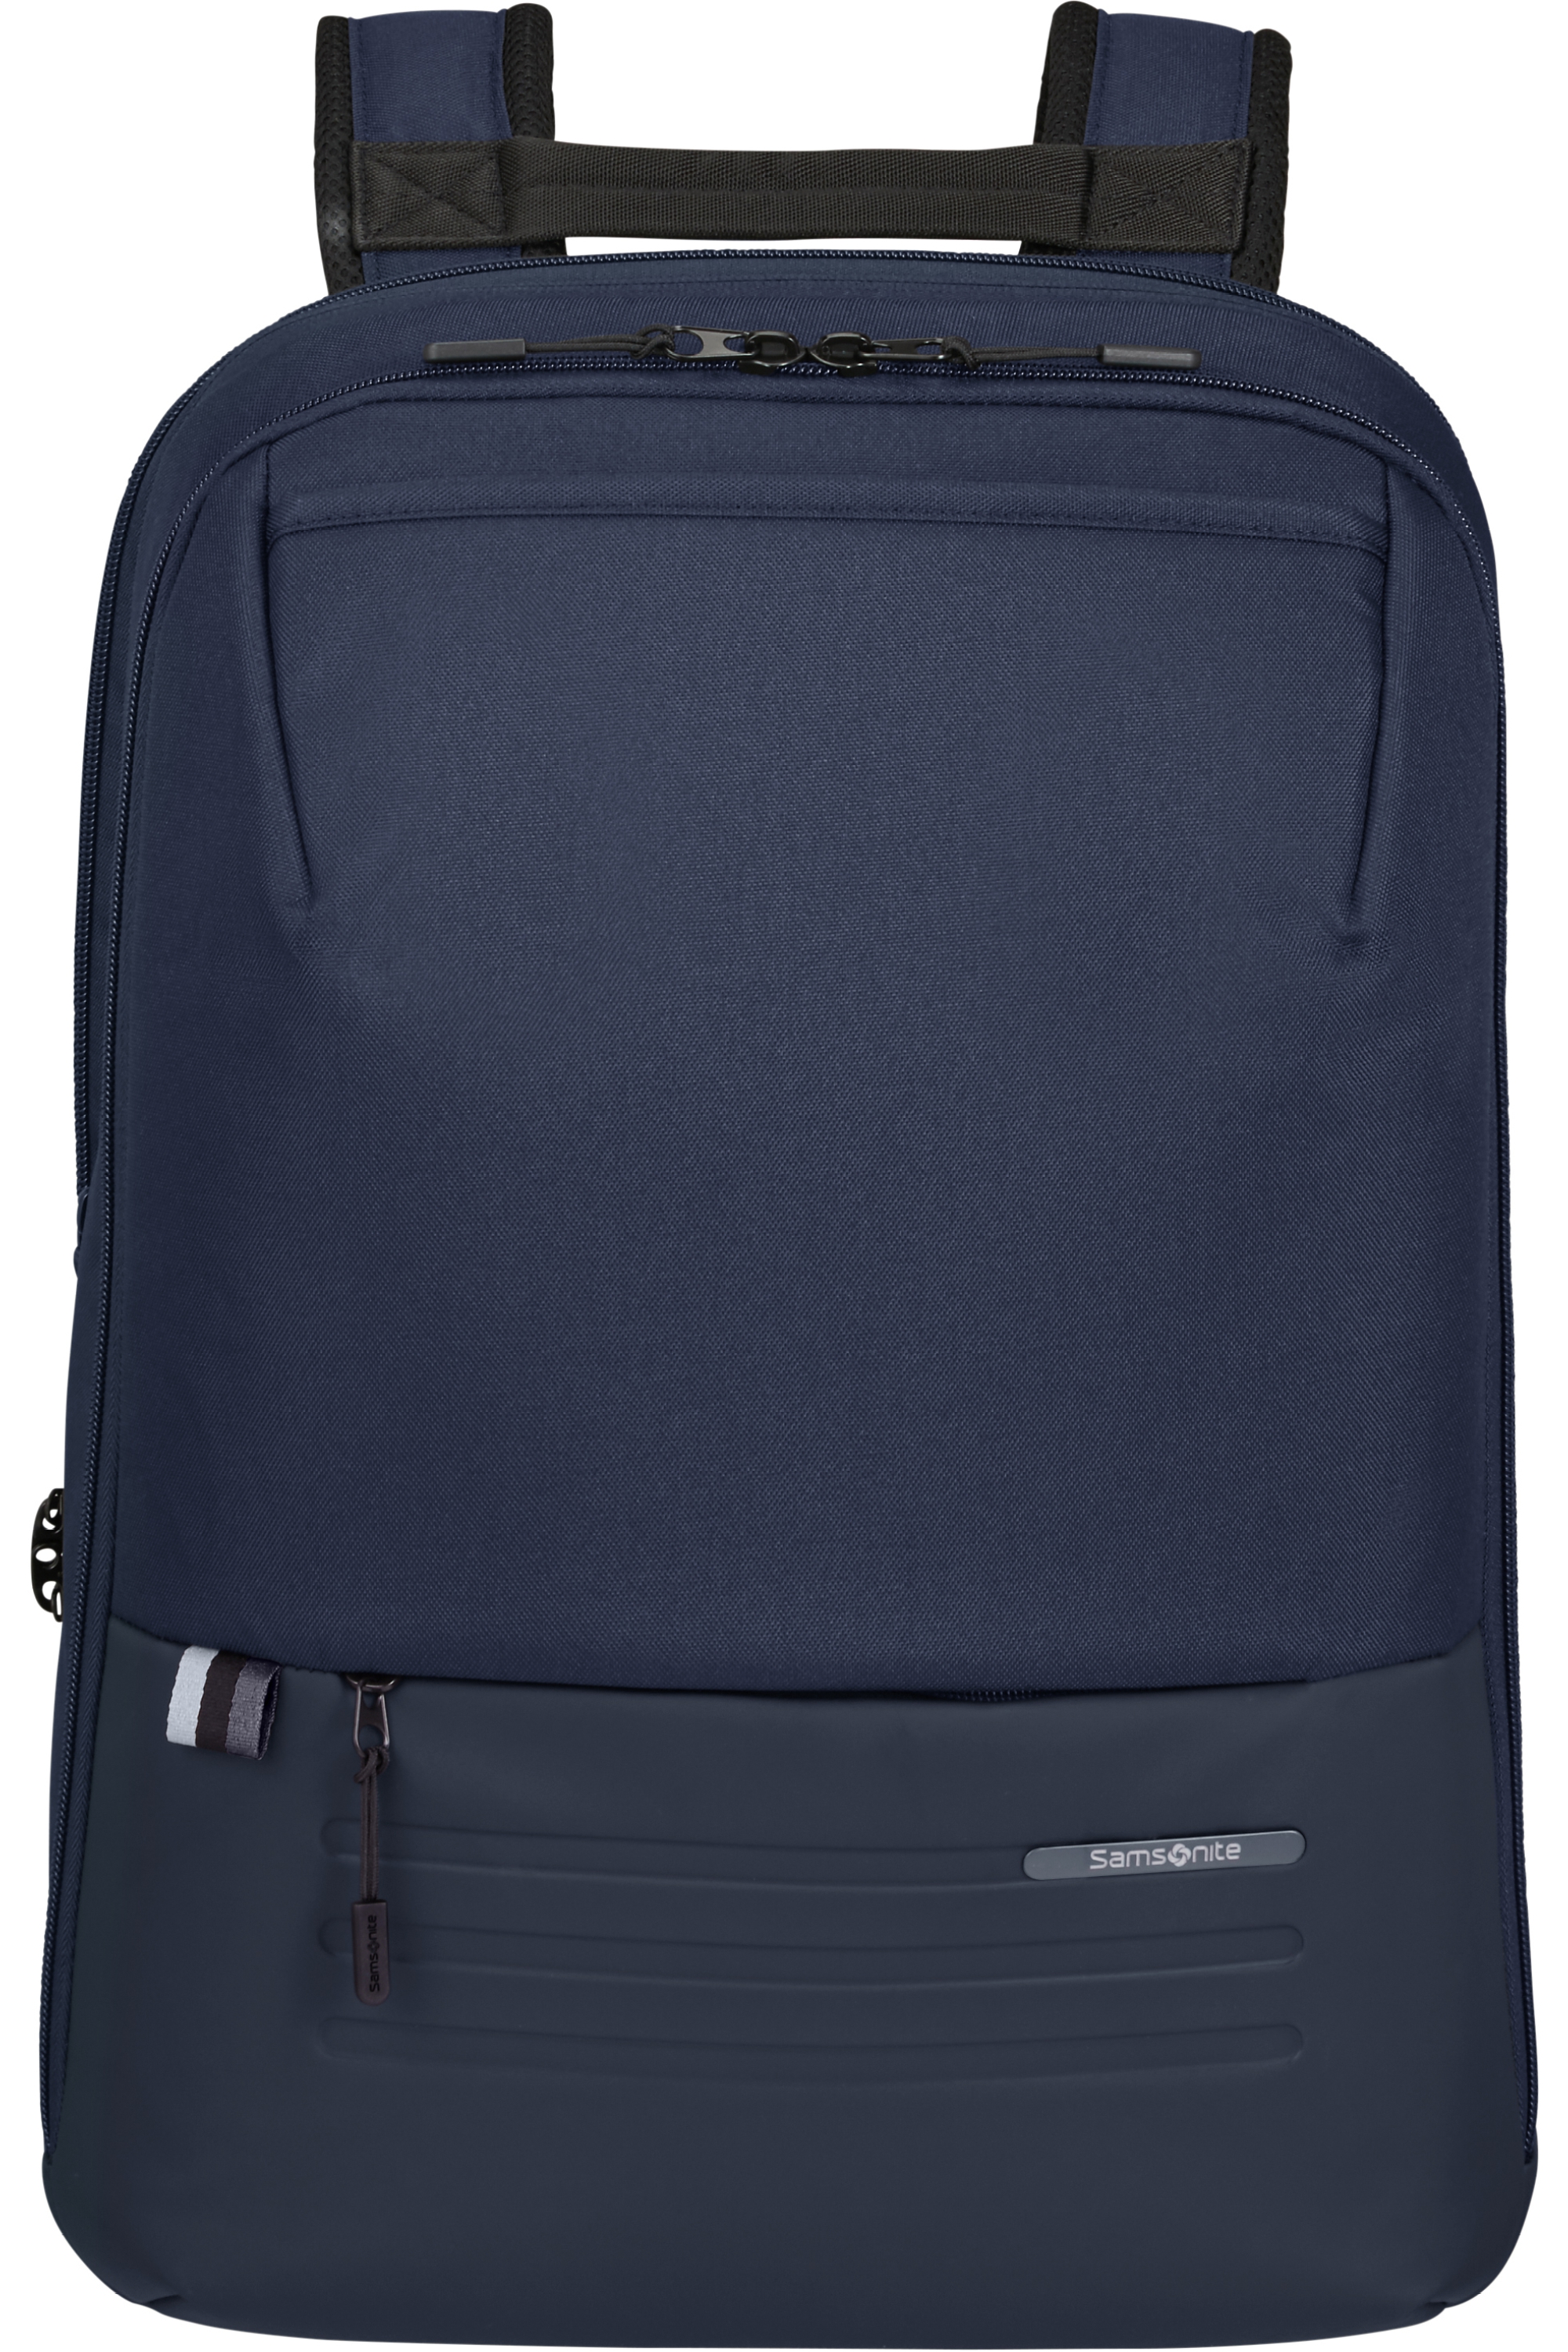 141472-1596-141472_1596_stackd_biz_laptop_backpack_17-3_exp_front-55f04d01-13dc-4b9c-90e1-adb700bb71a9-png